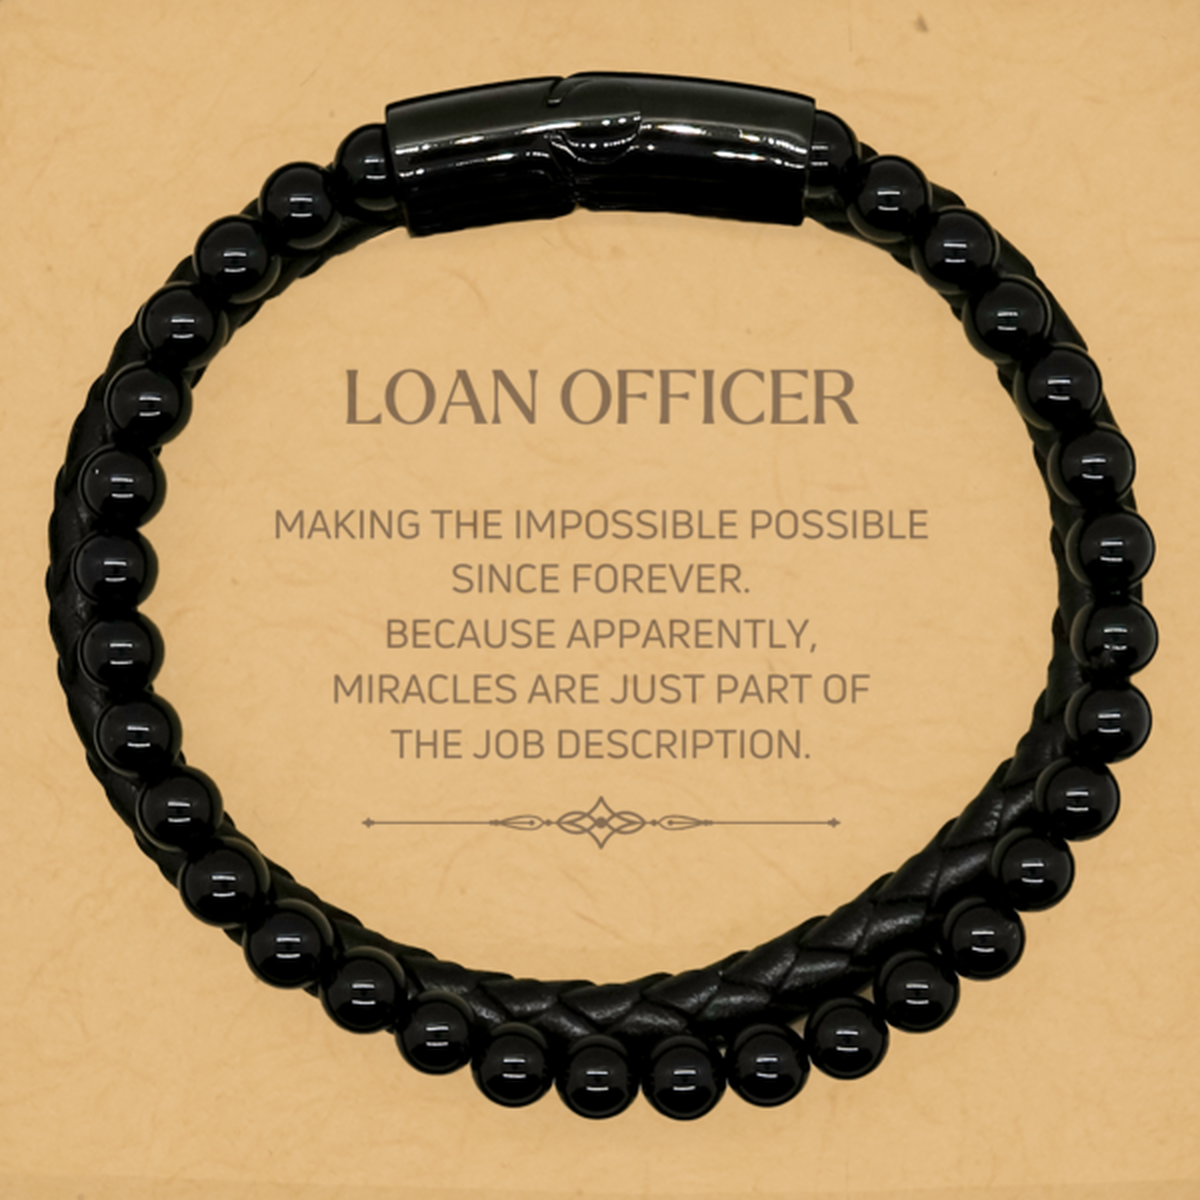 Funny Loan Officer Gifts, Miracles are just part of the job description, Inspirational Birthday Stone Leather Bracelets For Loan Officer, Men, Women, Coworkers, Friends, Boss